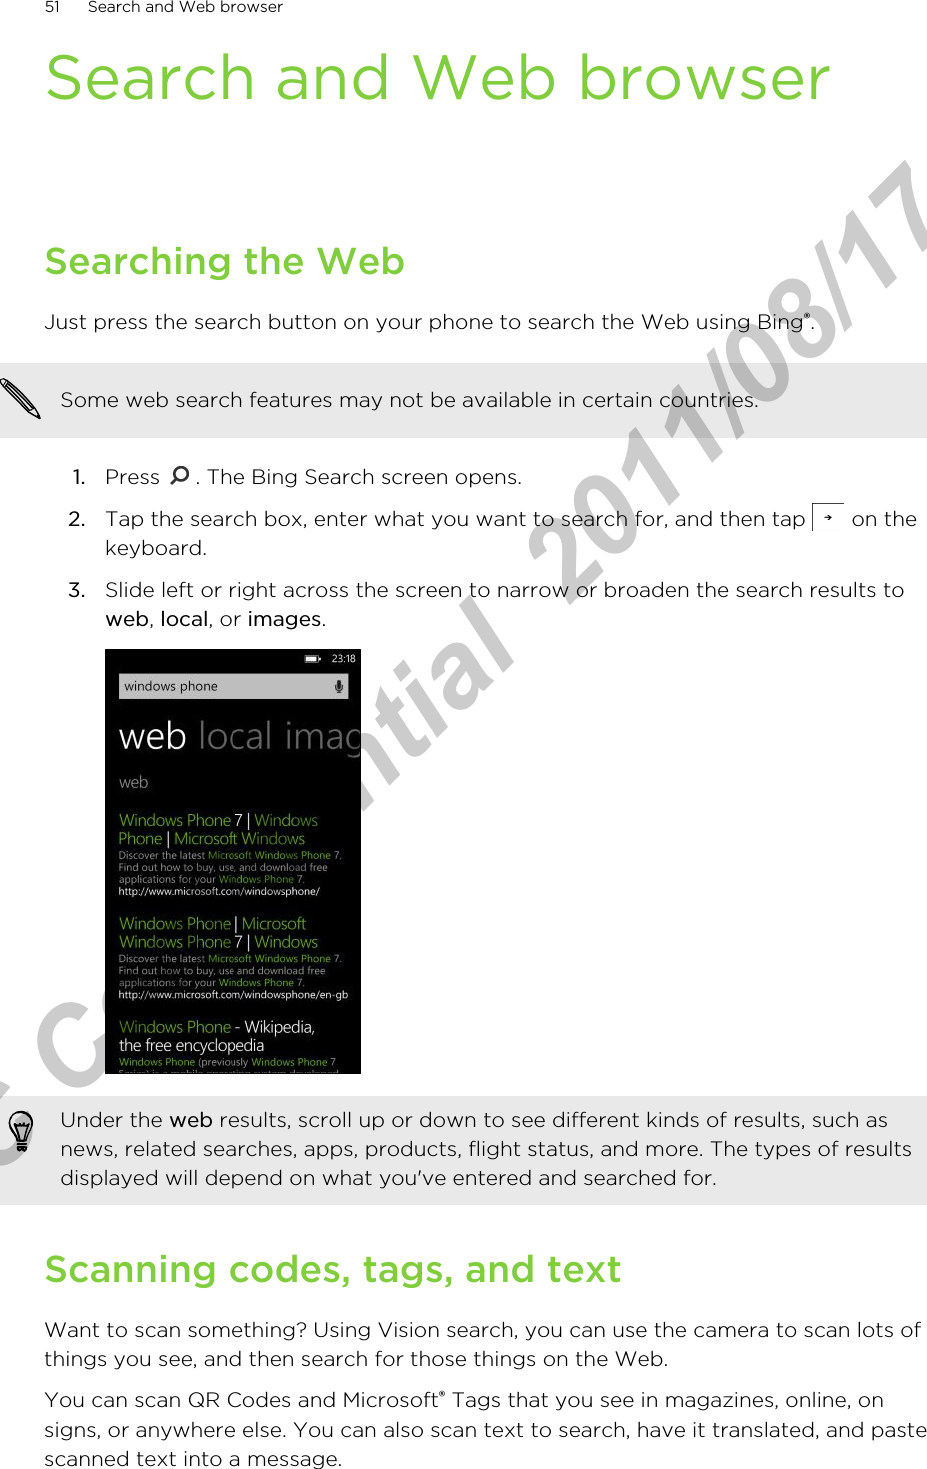 Search and Web browserSearching the WebJust press the search button on your phone to search the Web using Bing®.Some web search features may not be available in certain countries.1. Press  . The Bing Search screen opens.2. Tap the search box, enter what you want to search for, and then tap   on thekeyboard.3. Slide left or right across the screen to narrow or broaden the search results toweb, local, or images. Under the web results, scroll up or down to see different kinds of results, such asnews, related searches, apps, products, flight status, and more. The types of resultsdisplayed will depend on what you&apos;ve entered and searched for.Scanning codes, tags, and textWant to scan something? Using Vision search, you can use the camera to scan lots ofthings you see, and then search for those things on the Web.You can scan QR Codes and Microsoft® Tags that you see in magazines, online, onsigns, or anywhere else. You can also scan text to search, have it translated, and pastescanned text into a message.51 Search and Web browserHTC Confidential  2011/08/17 